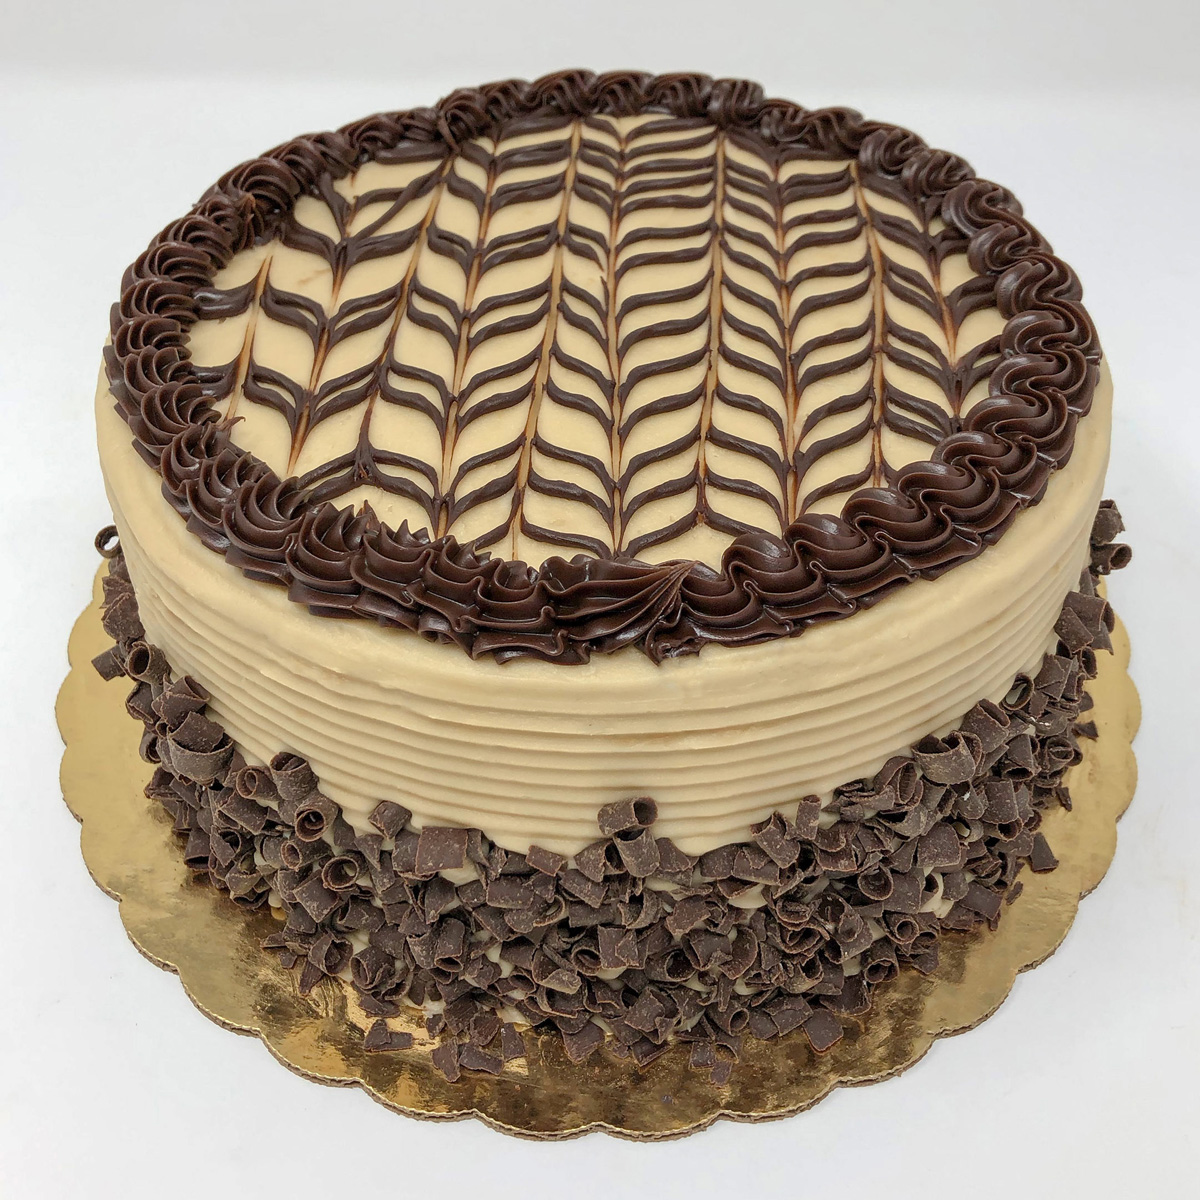 Coffee Delight Cake | Kosher Cakery | Kosher Cakes & Gift Delivery in Israel